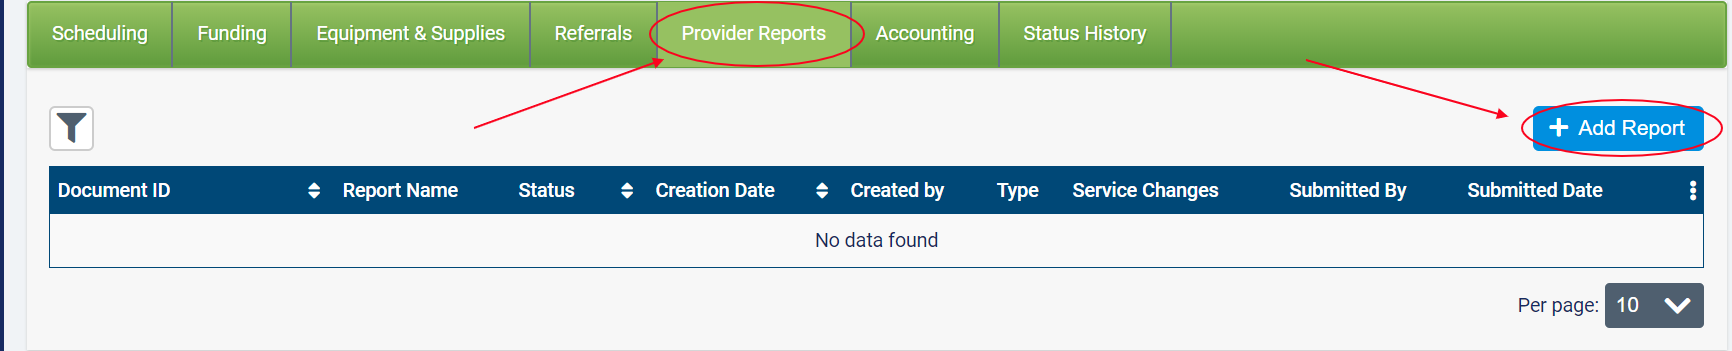 provider_reports_add_report.png